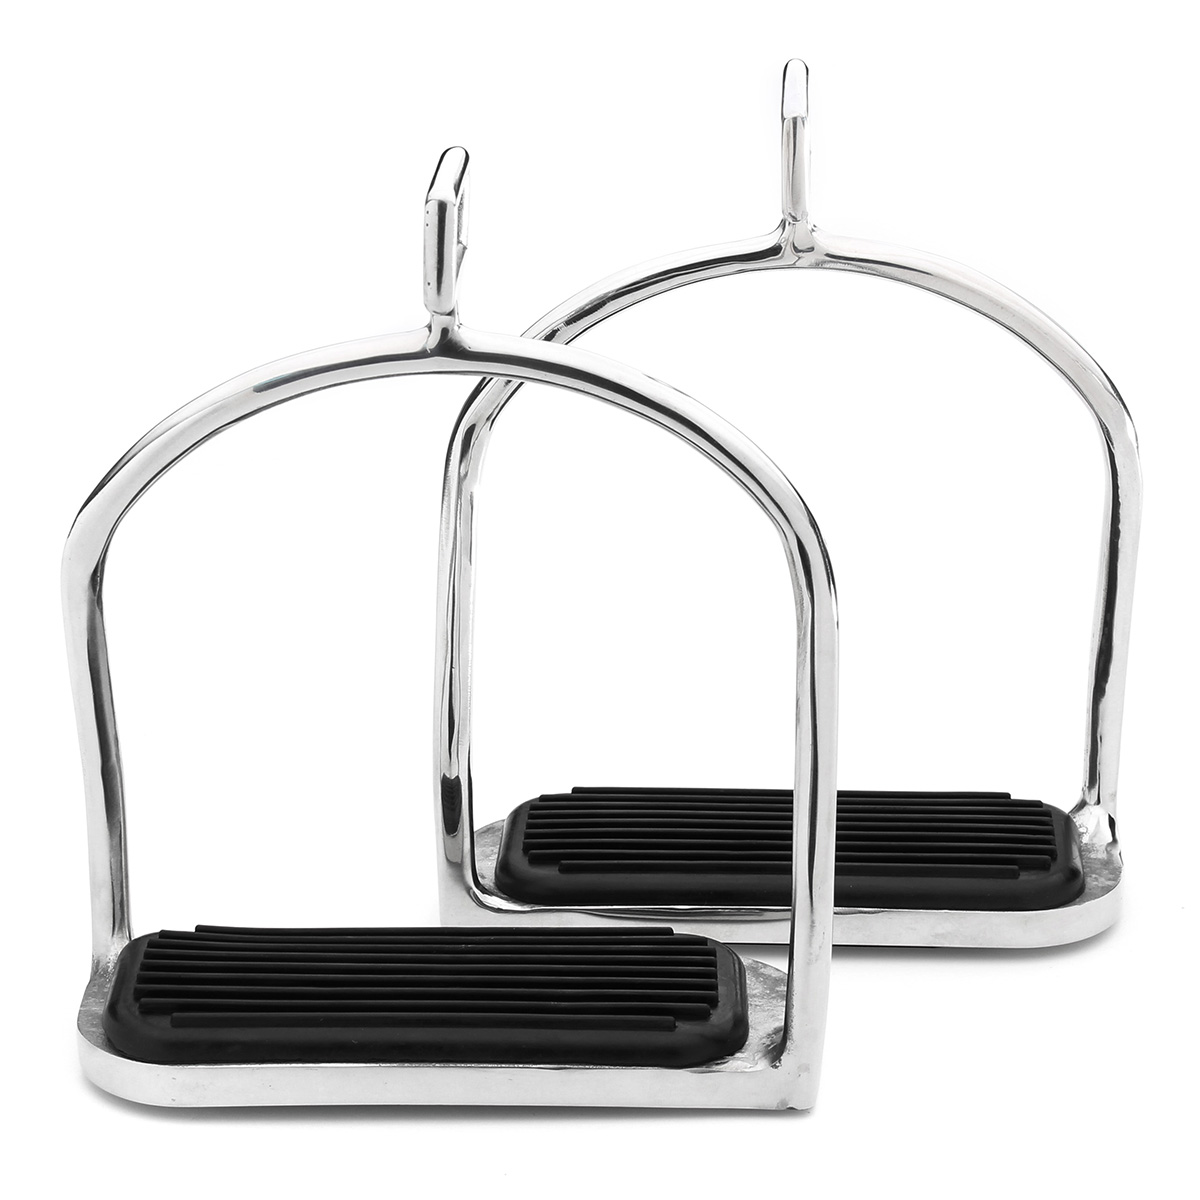 Horse-Riding-Stirrups-Stainless-Steel-Double-Bent-Safety-Stirrups-Irons-1241405